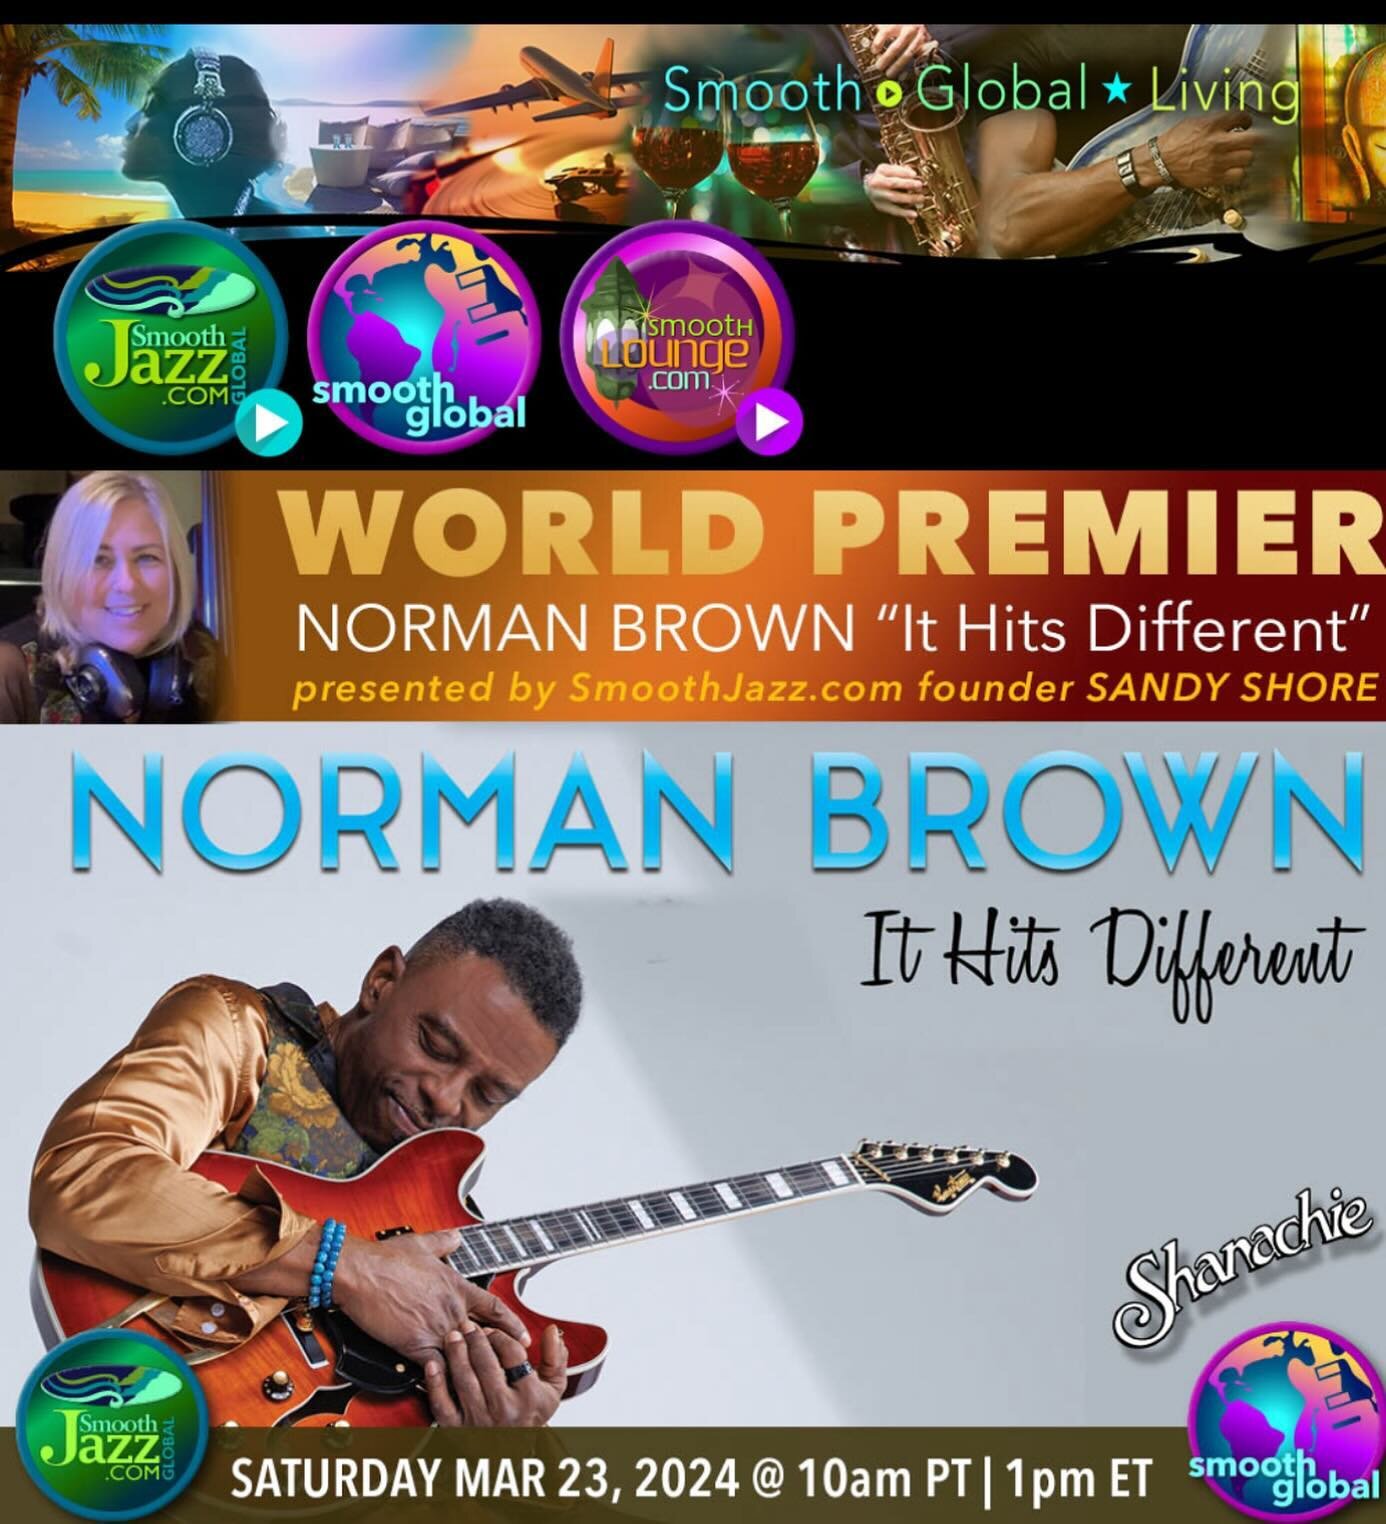 Check out the world premiere of @normanticmusic new project IT HITS DIFFERENT on @smoothjazzglobal this Saturday 3/23 at 10amPT/1pmET. Album available everywhere 3/29. Link in bio! @sandyshore #normanbrown #ithitsdifferent #smoothjazzglobalradio #sha